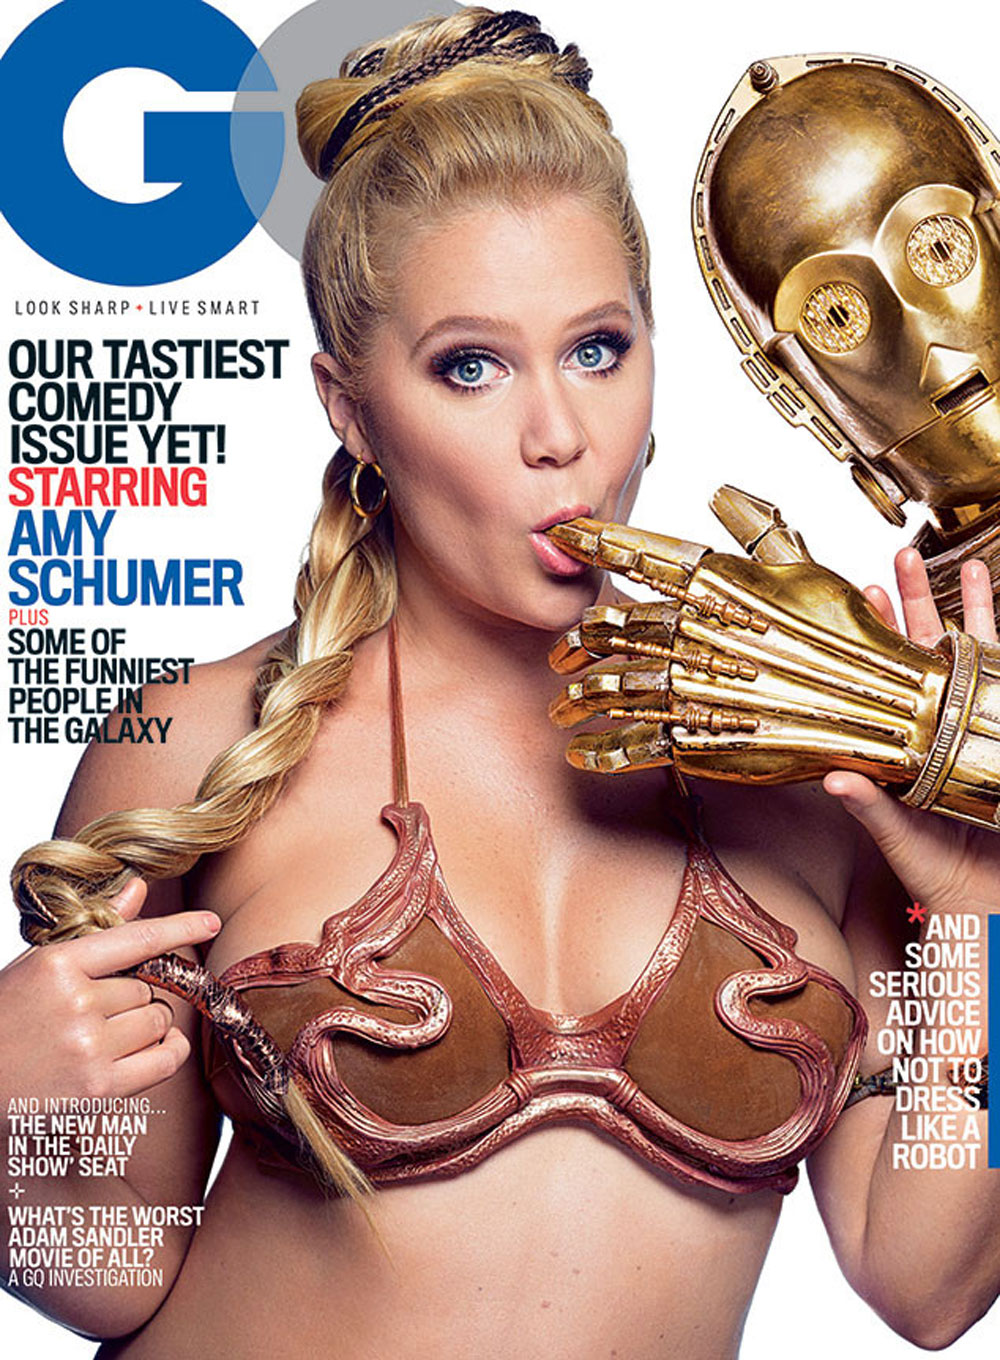 Sexy Star Wars - is amy schumers sexy star wars cover the best nerd porn of all time -  XXXPicz